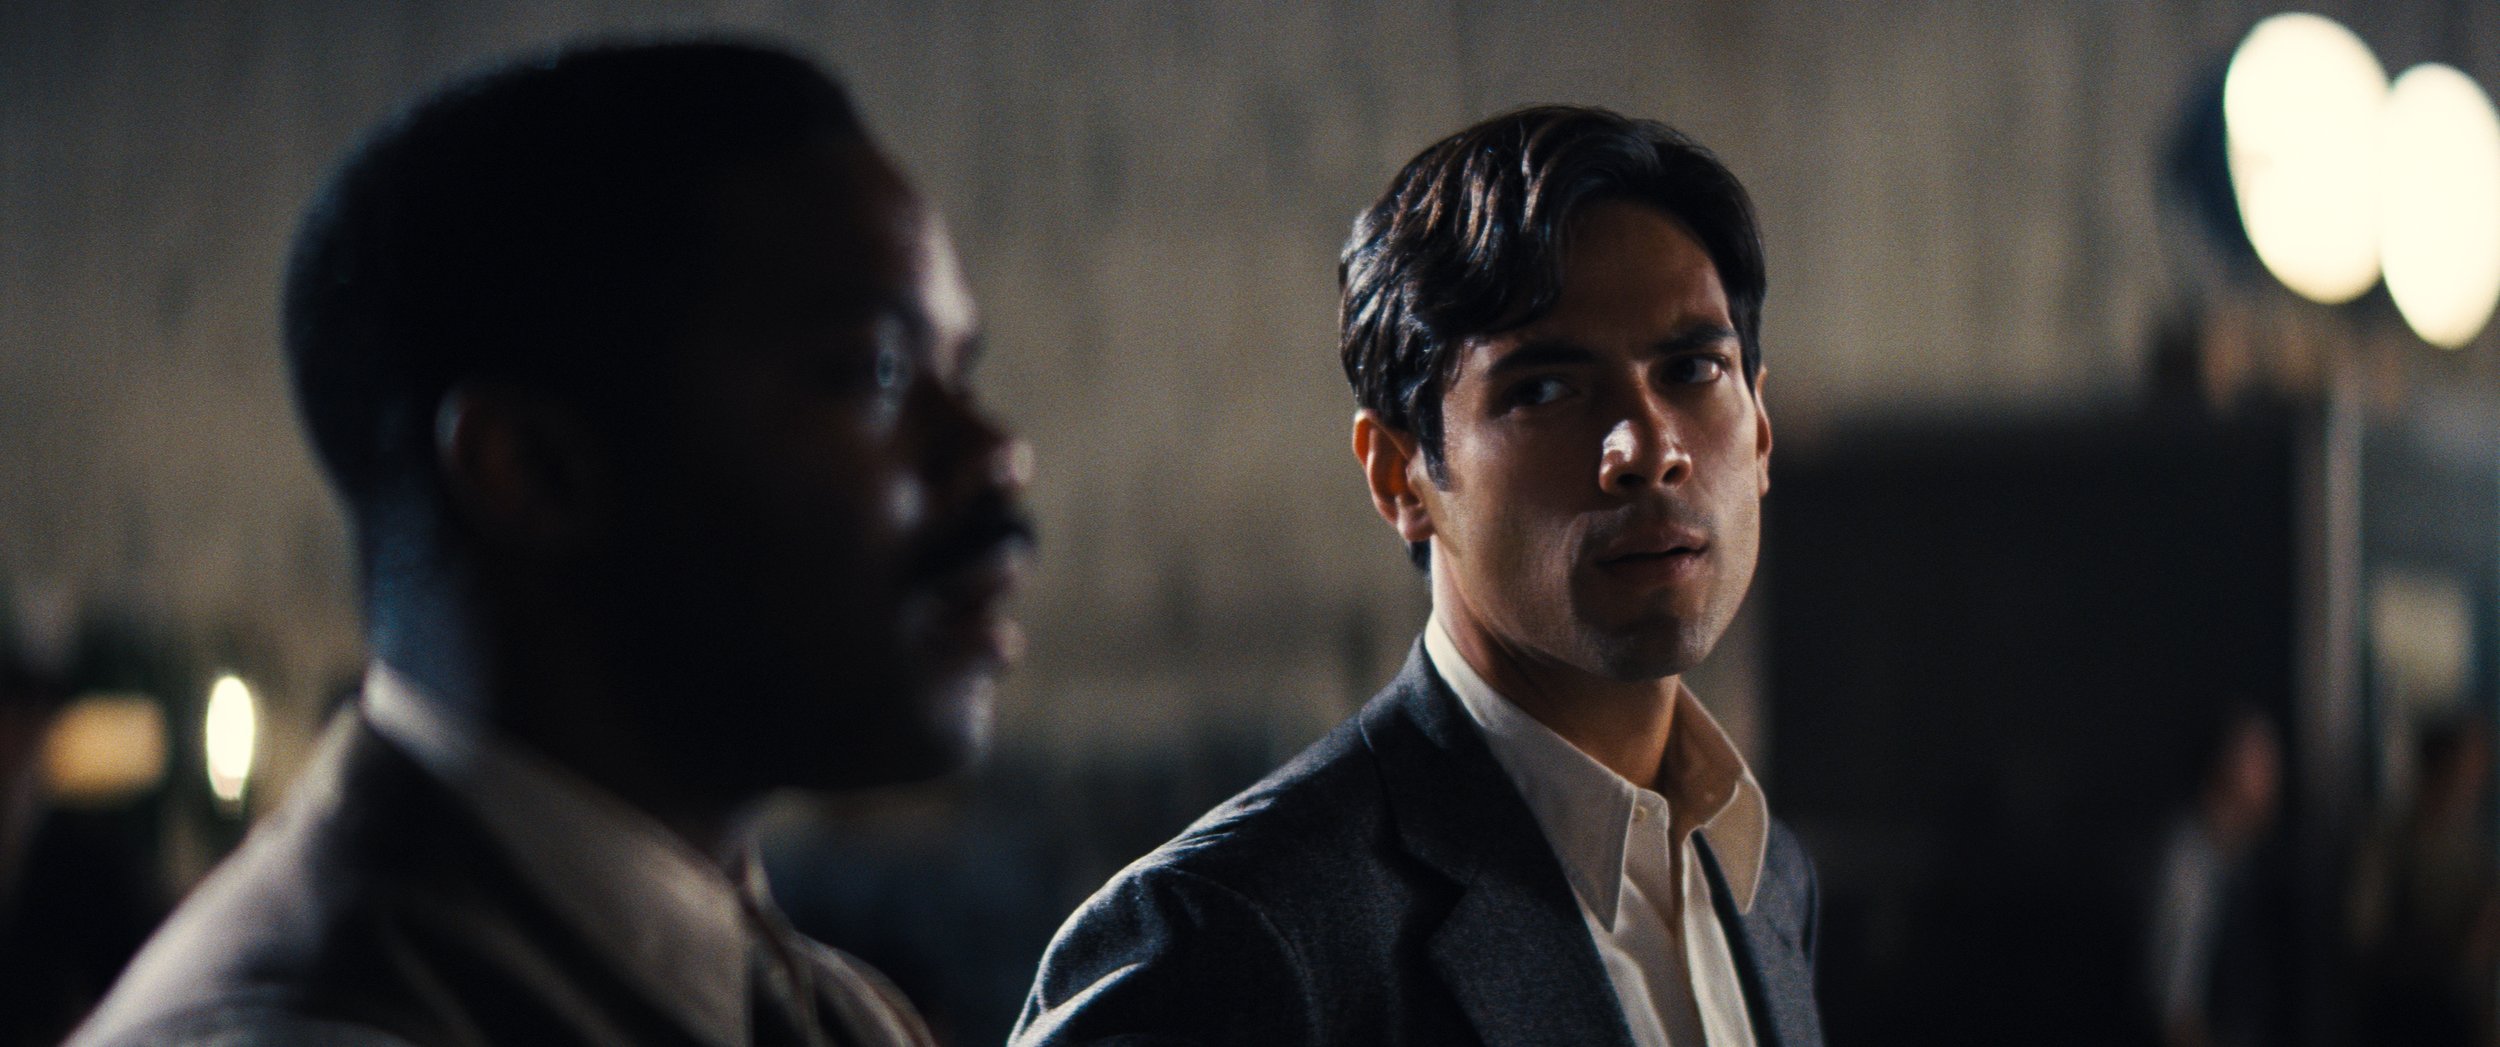  Jovan Adepo plays Sidney Palmer and Diego Calva plays Manny Torres in Babylon from Paramount Pictures.  